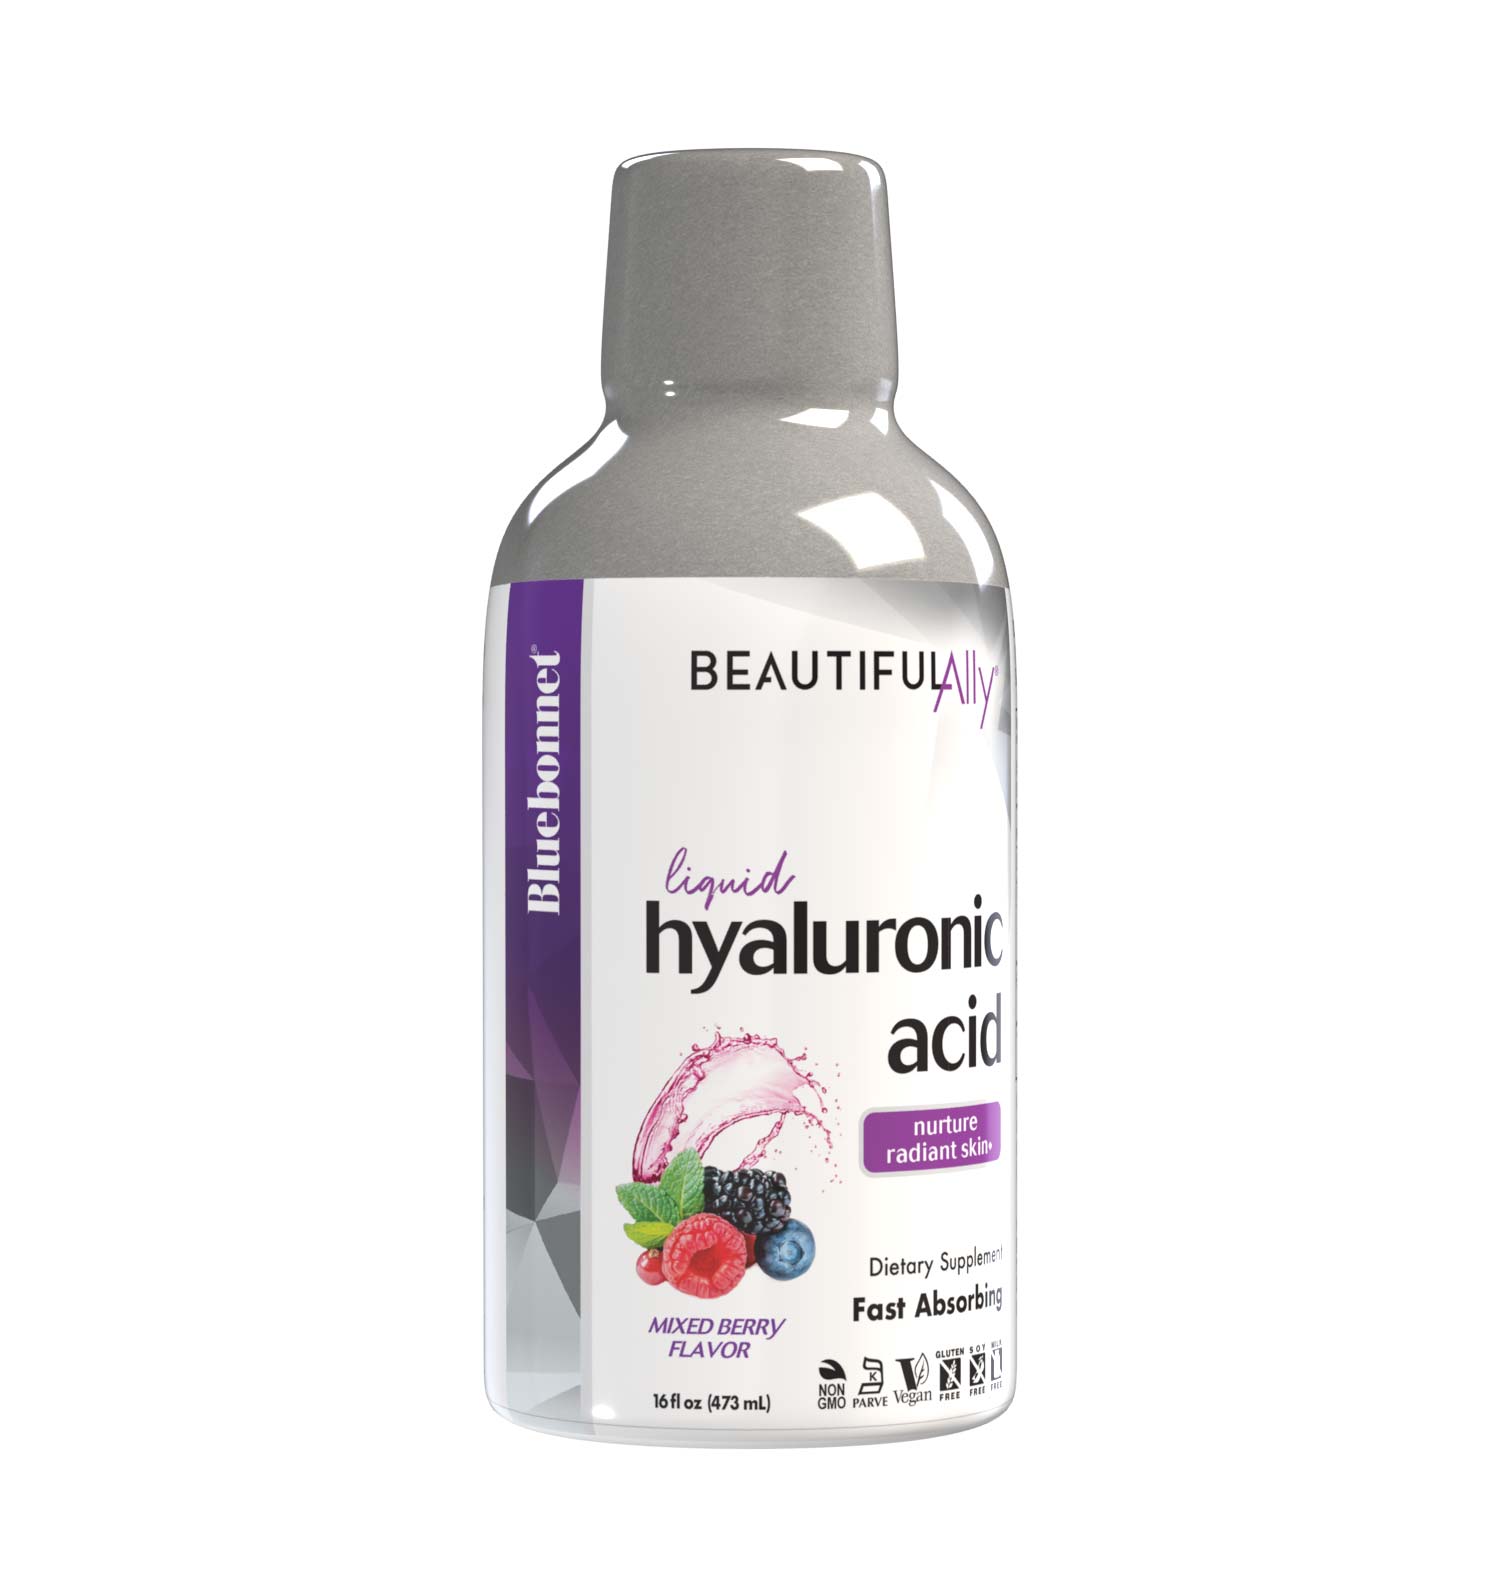 Bluebonnet’s Beautiful Ally Liquid Hyaluronic Acid is specially formulated to increase skin hydration and repair with vegan-sourced hyaluronic acid in a base of non-GMO sunflower oil. Hyaluronic acid is precent in every tissue of the body, serving as a cushion and lubricant within the skin to create a more supple, luminescent, youthful appearance. #size_16 fl oz